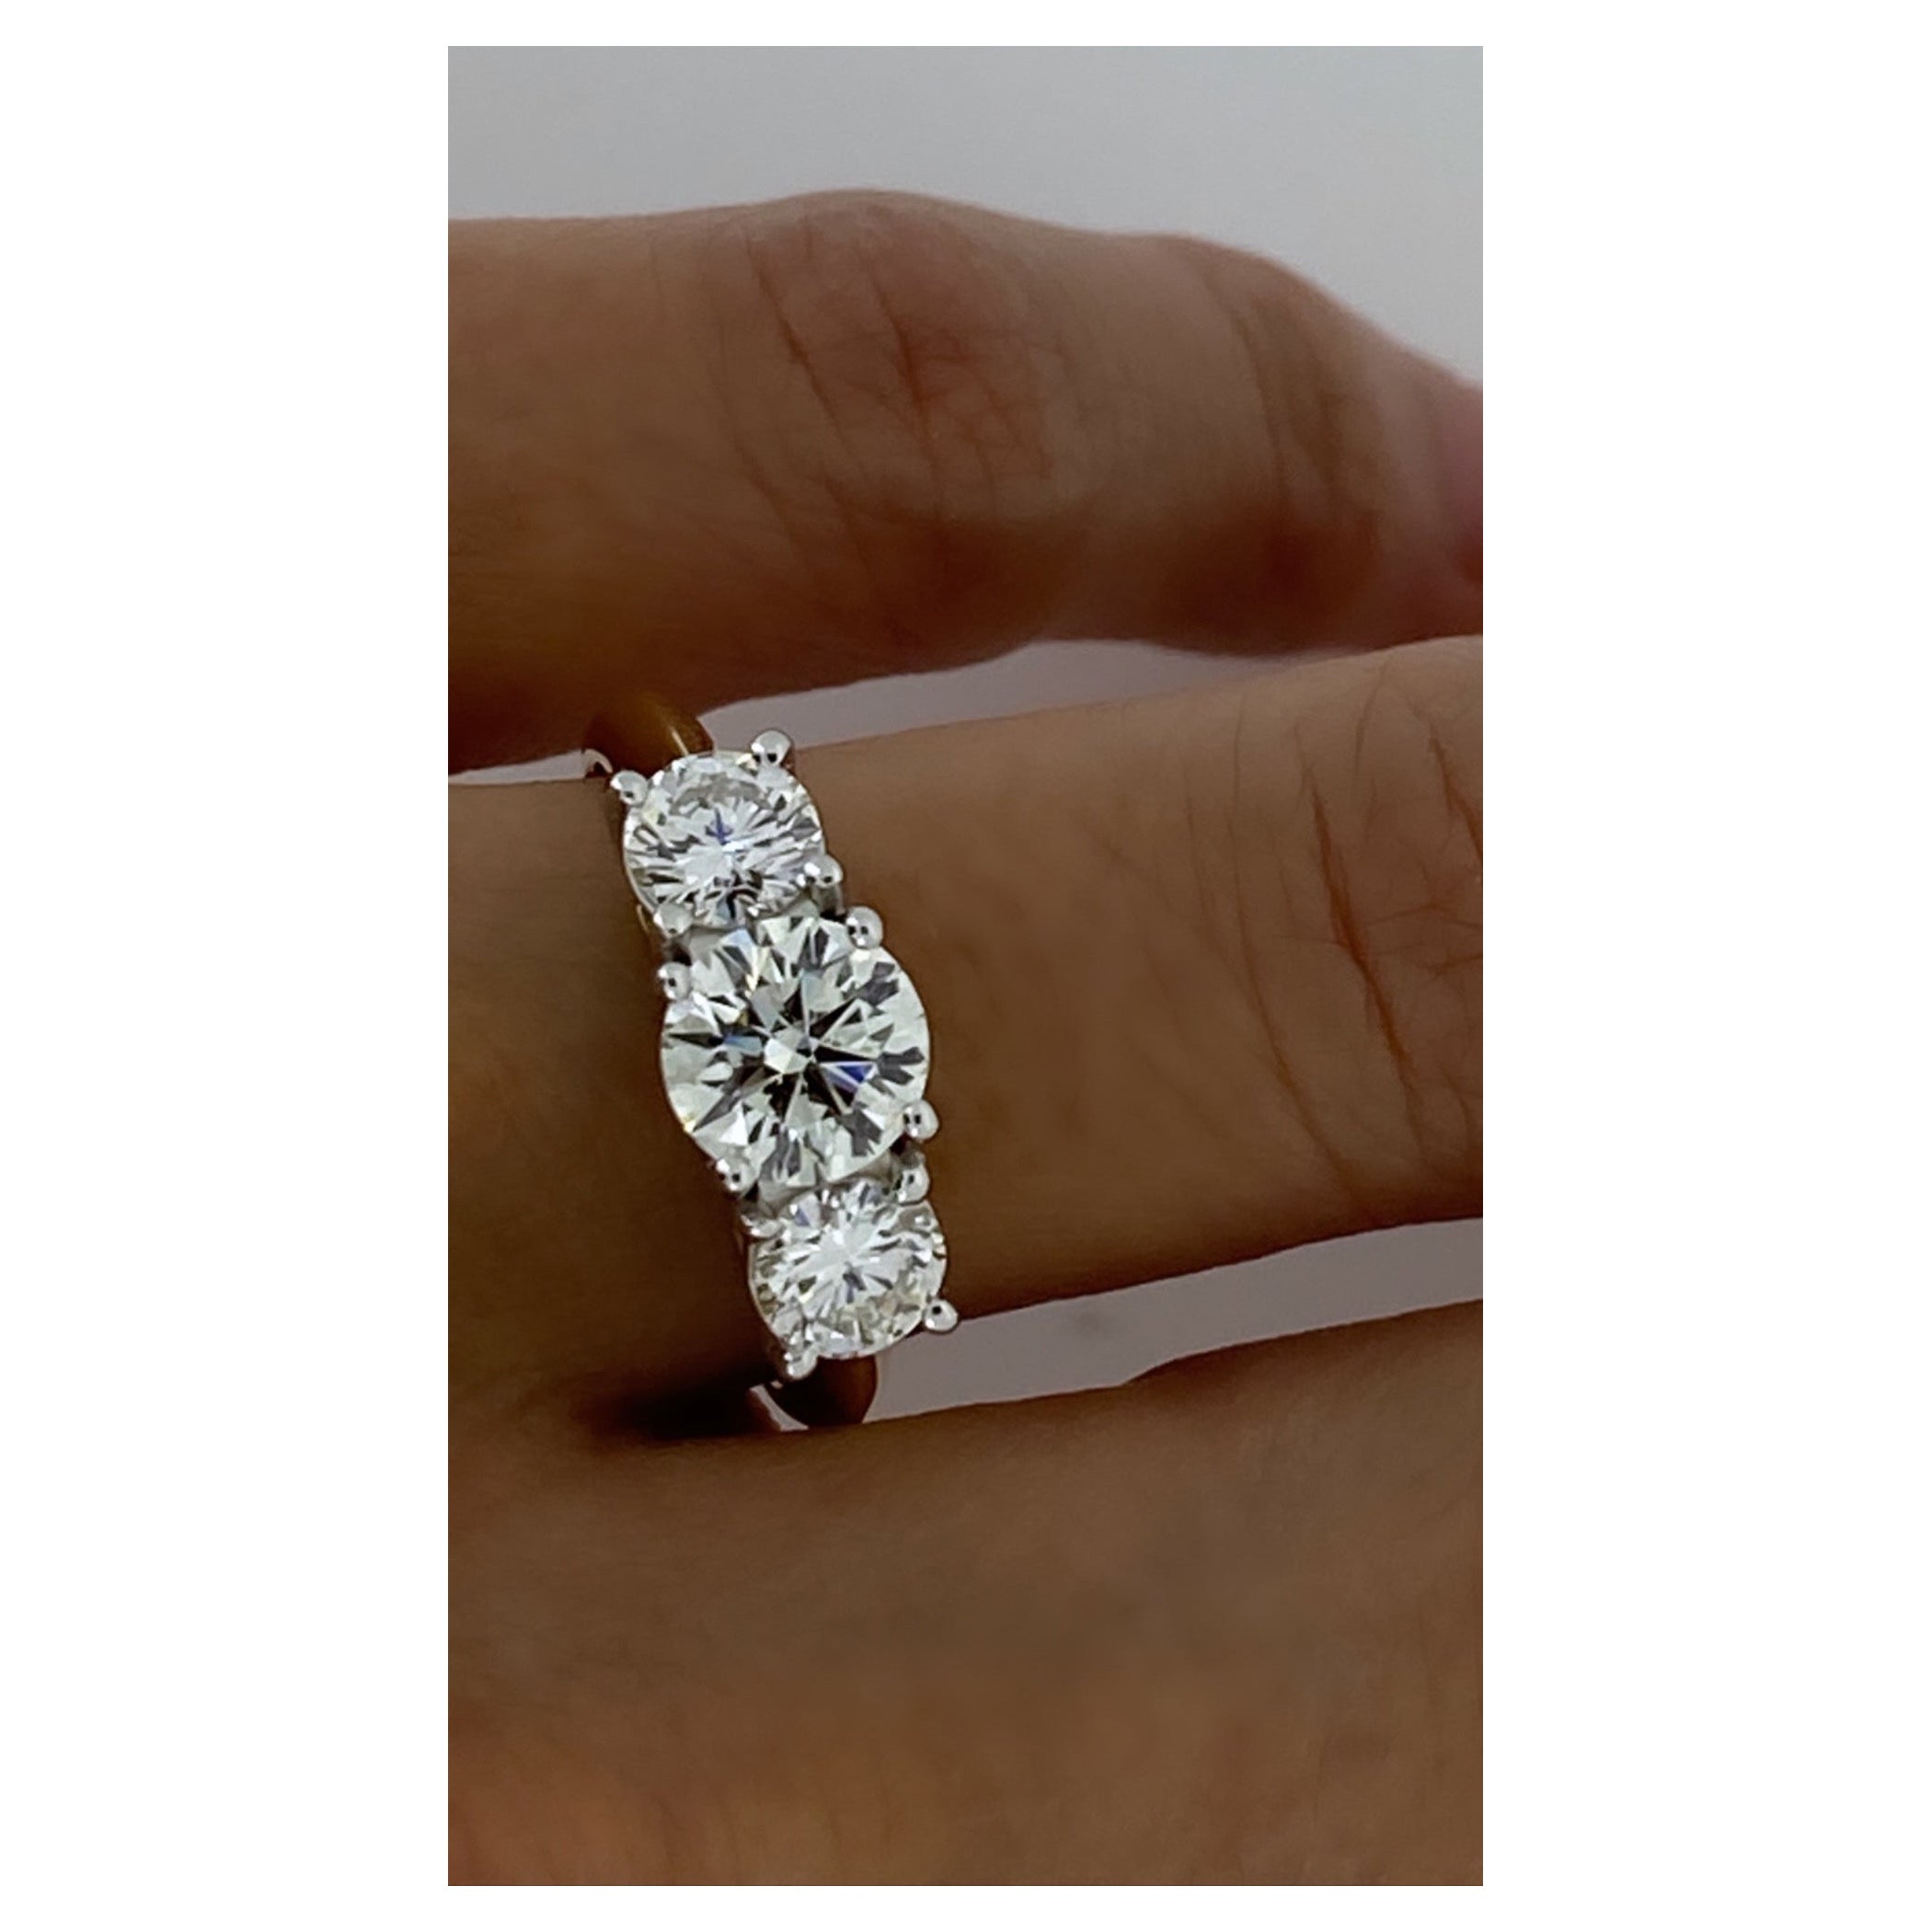 Superb 2.05ct 3-Stone Diamond Ring in 18K Gold. Center stone: 1.05ct, Ideal Cut. For Sale